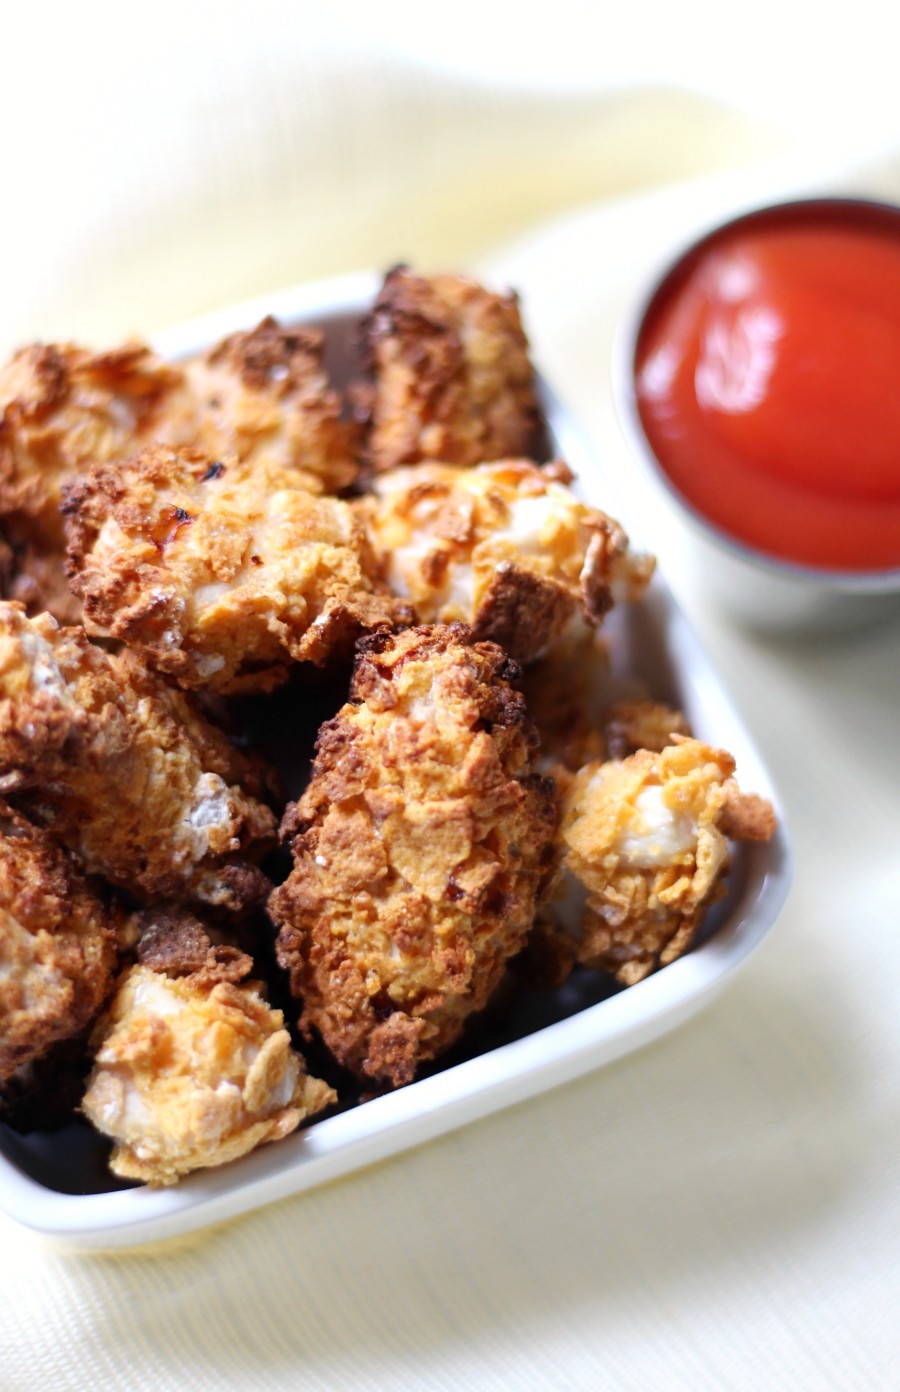 Extra Crispy Gluten-Free Air Fryer Popcorn Chicken (Allergy-Free, No Oil) | Strength and Sunshine @RebeccaGF666 No oil needed for this Extra Crispy Gluten-Free Air Fryer Popcorn Chicken recipe! A healthier, super crunchy version of your fast food favorite that's top 8 allergy-free, a mom-approved quick & easy dinner idea, and kid-friendly! sponsored #popcornchicken #glutenfree #allergyfree #dinner #chicken